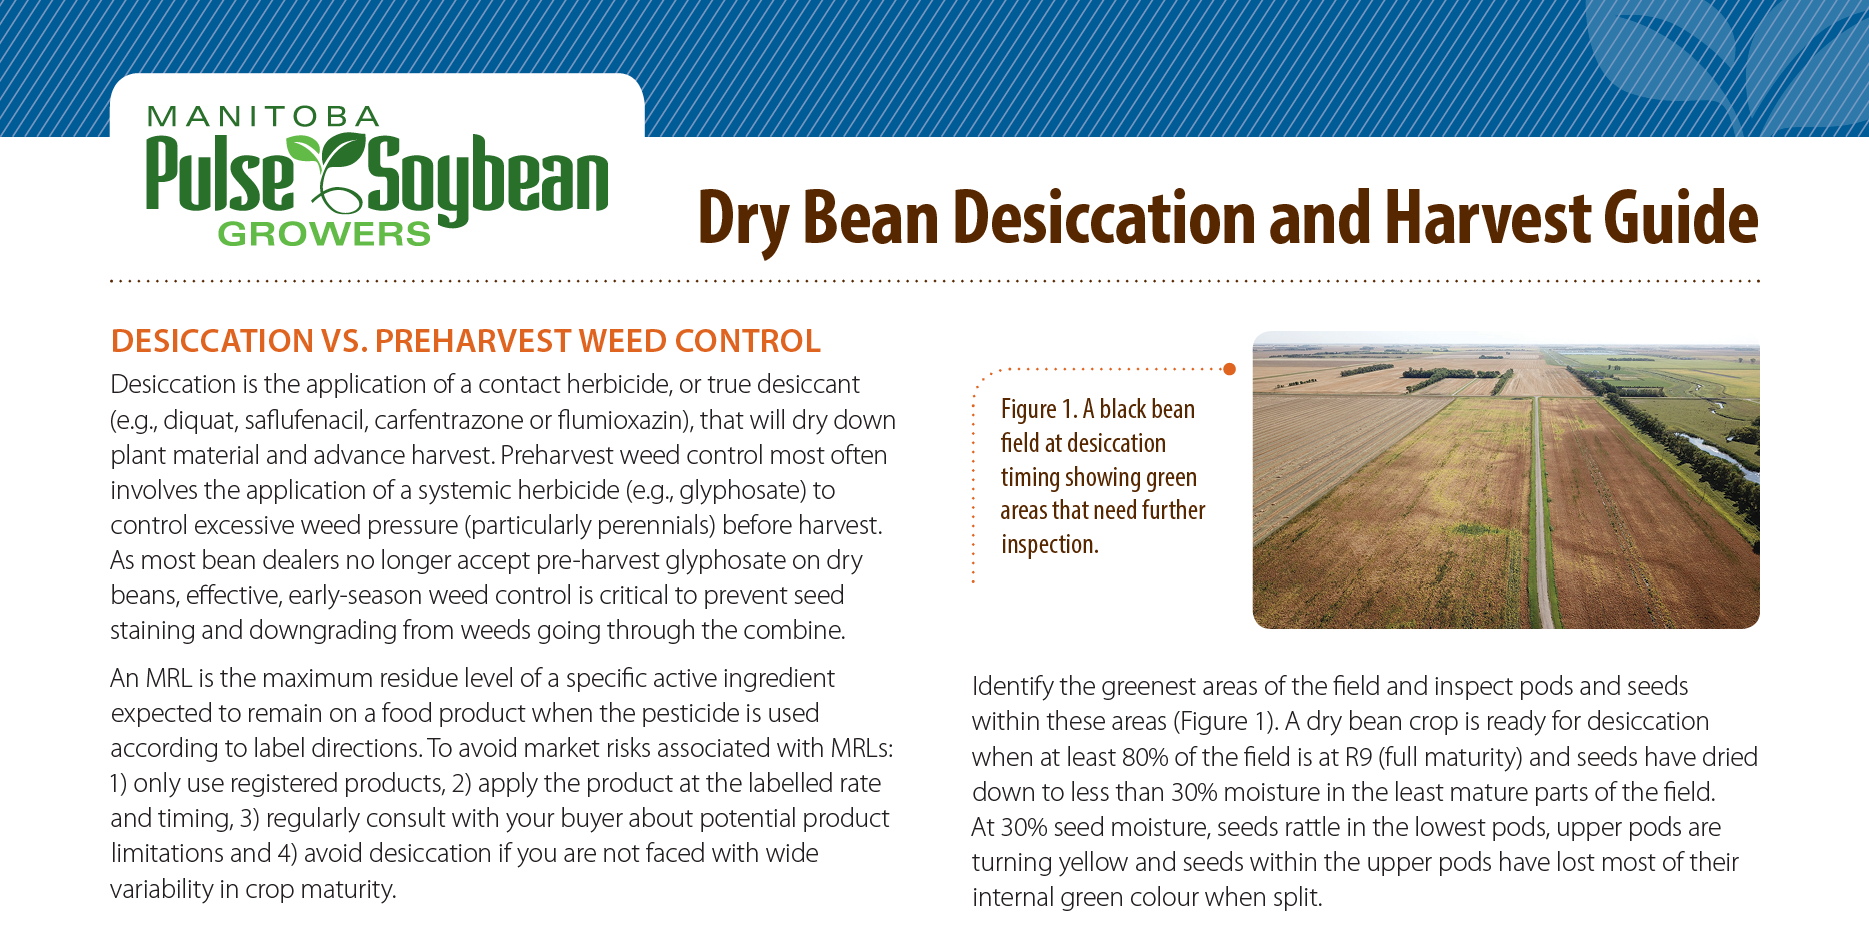 Dry Bean Desiccation and Harvest Guide